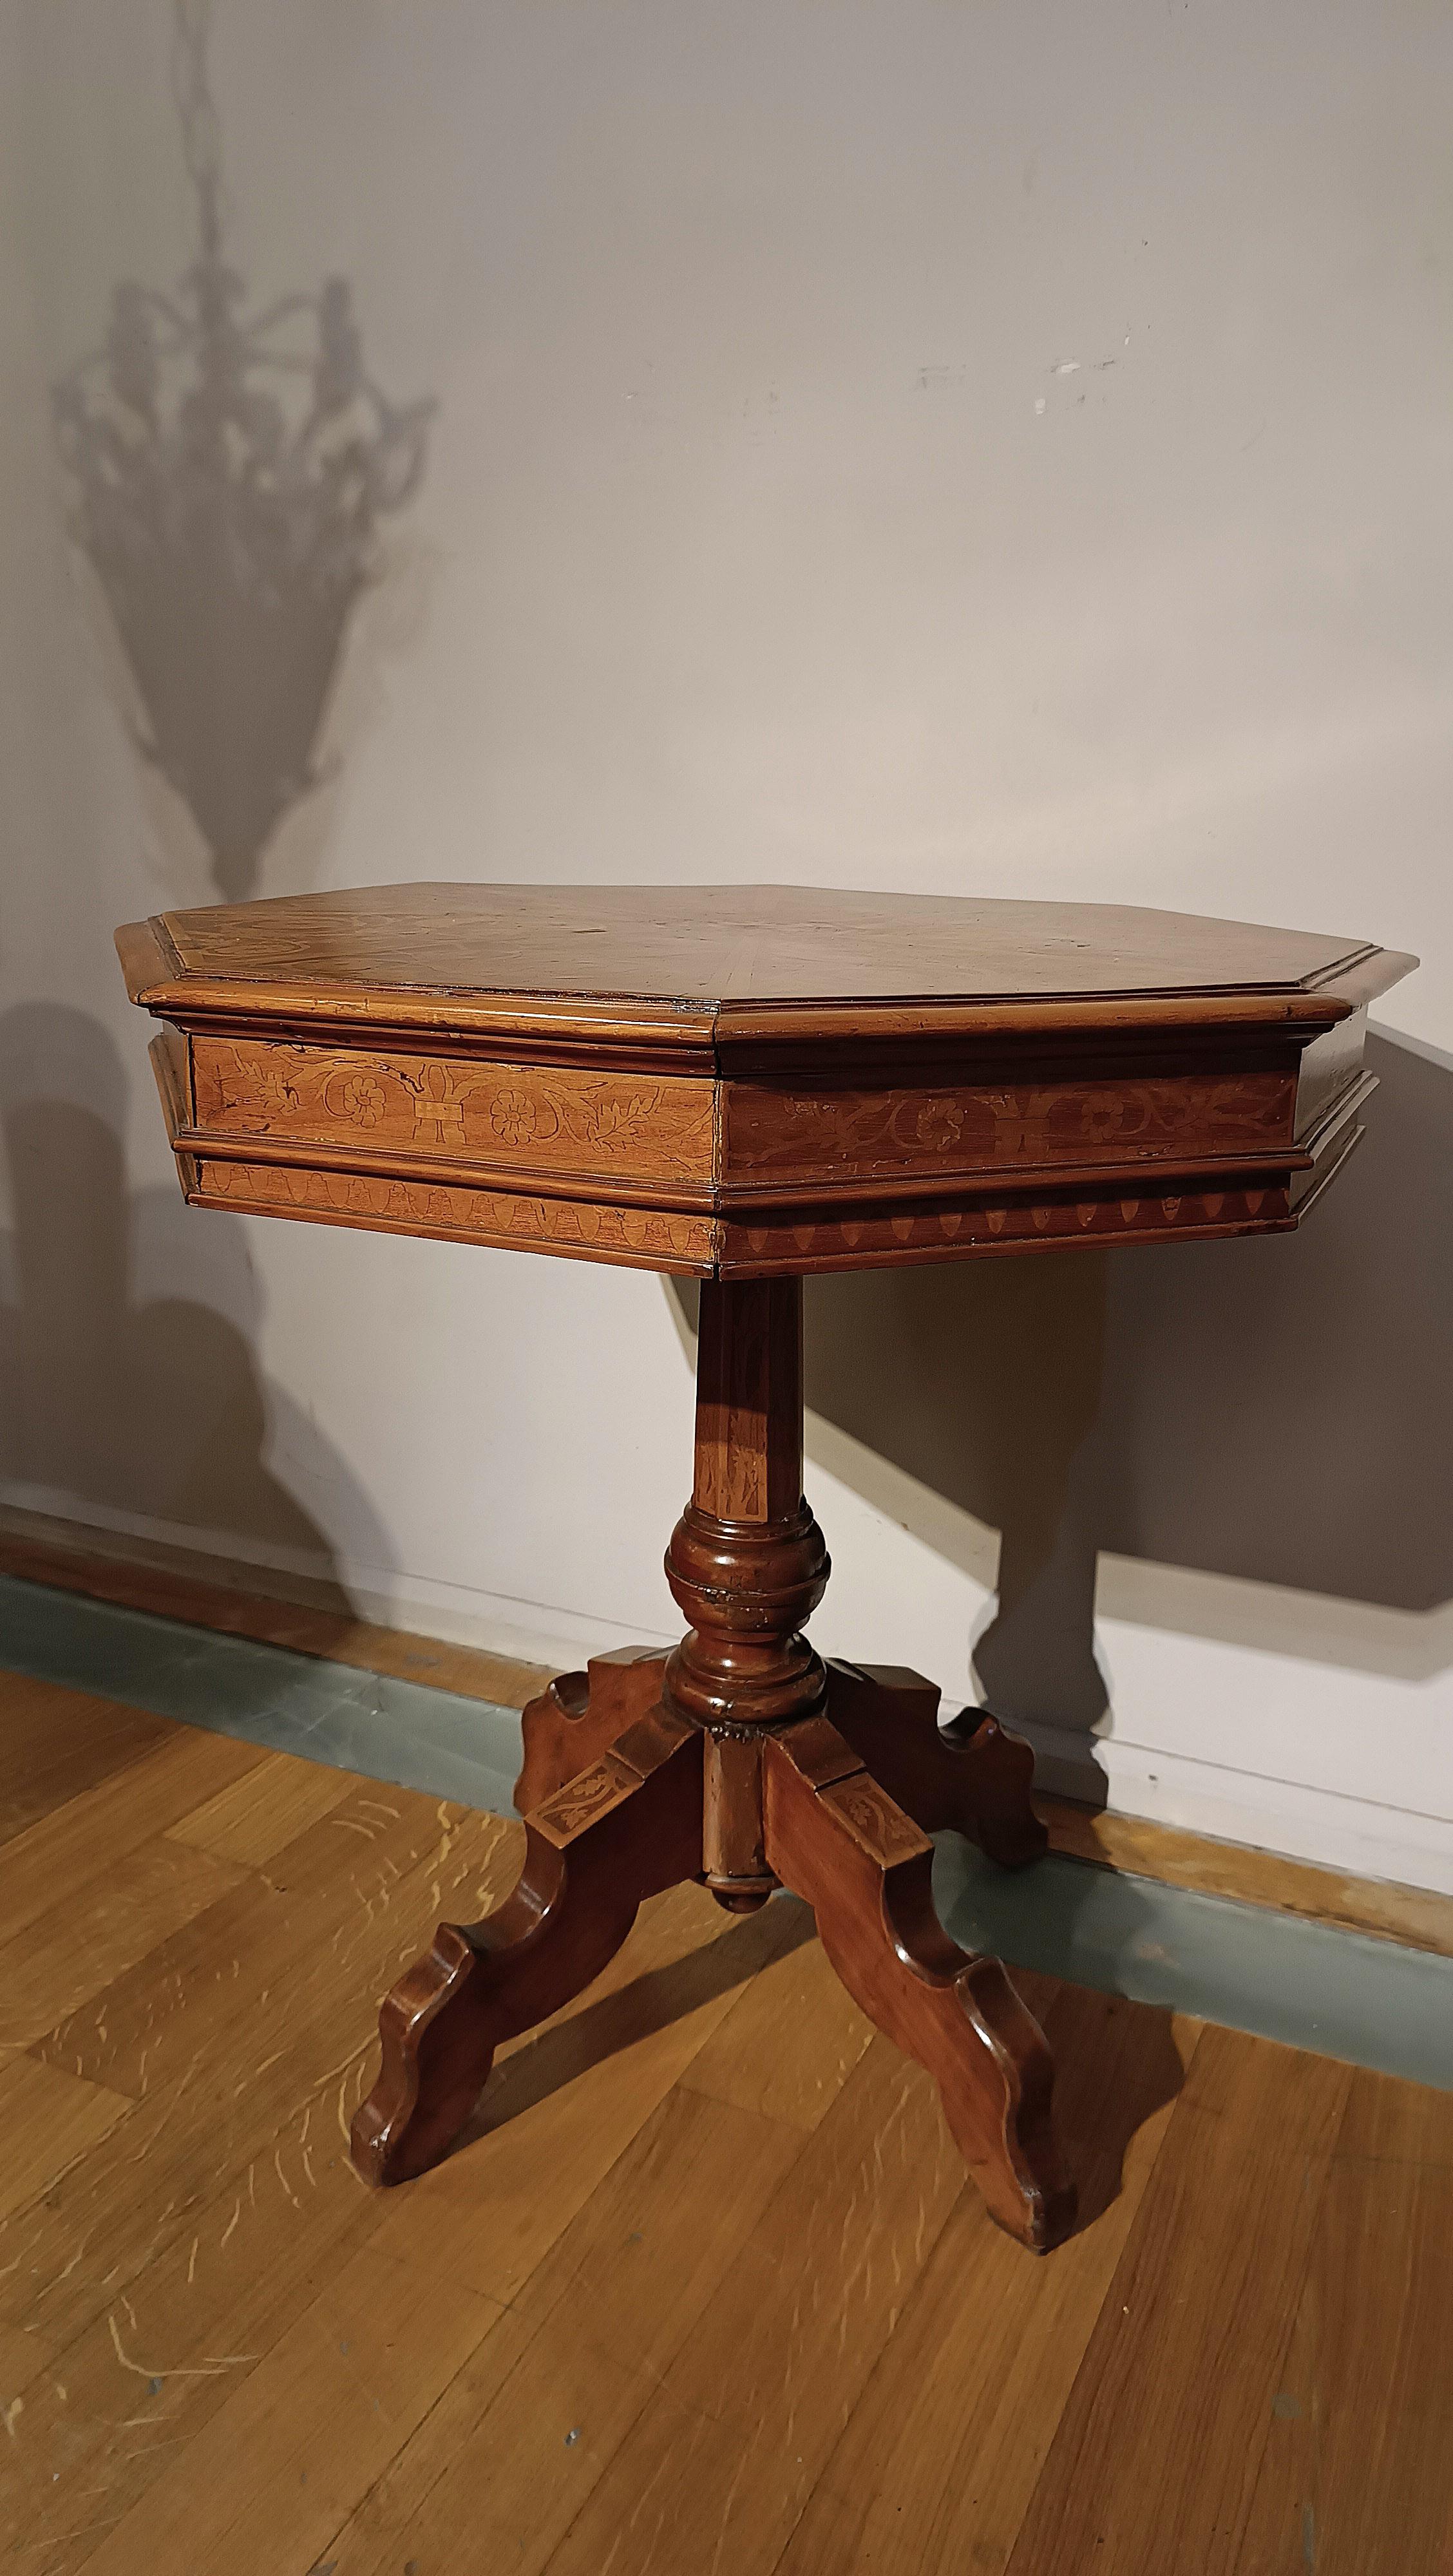 Beautiful walnut coffee table, decorated with refined light wood inlays that adorn the band, top and legs. The top has an octagonal shape with elegant lozenge inlays and vegetal motifs, and in the center a graceful little bird in ebonized wood. The